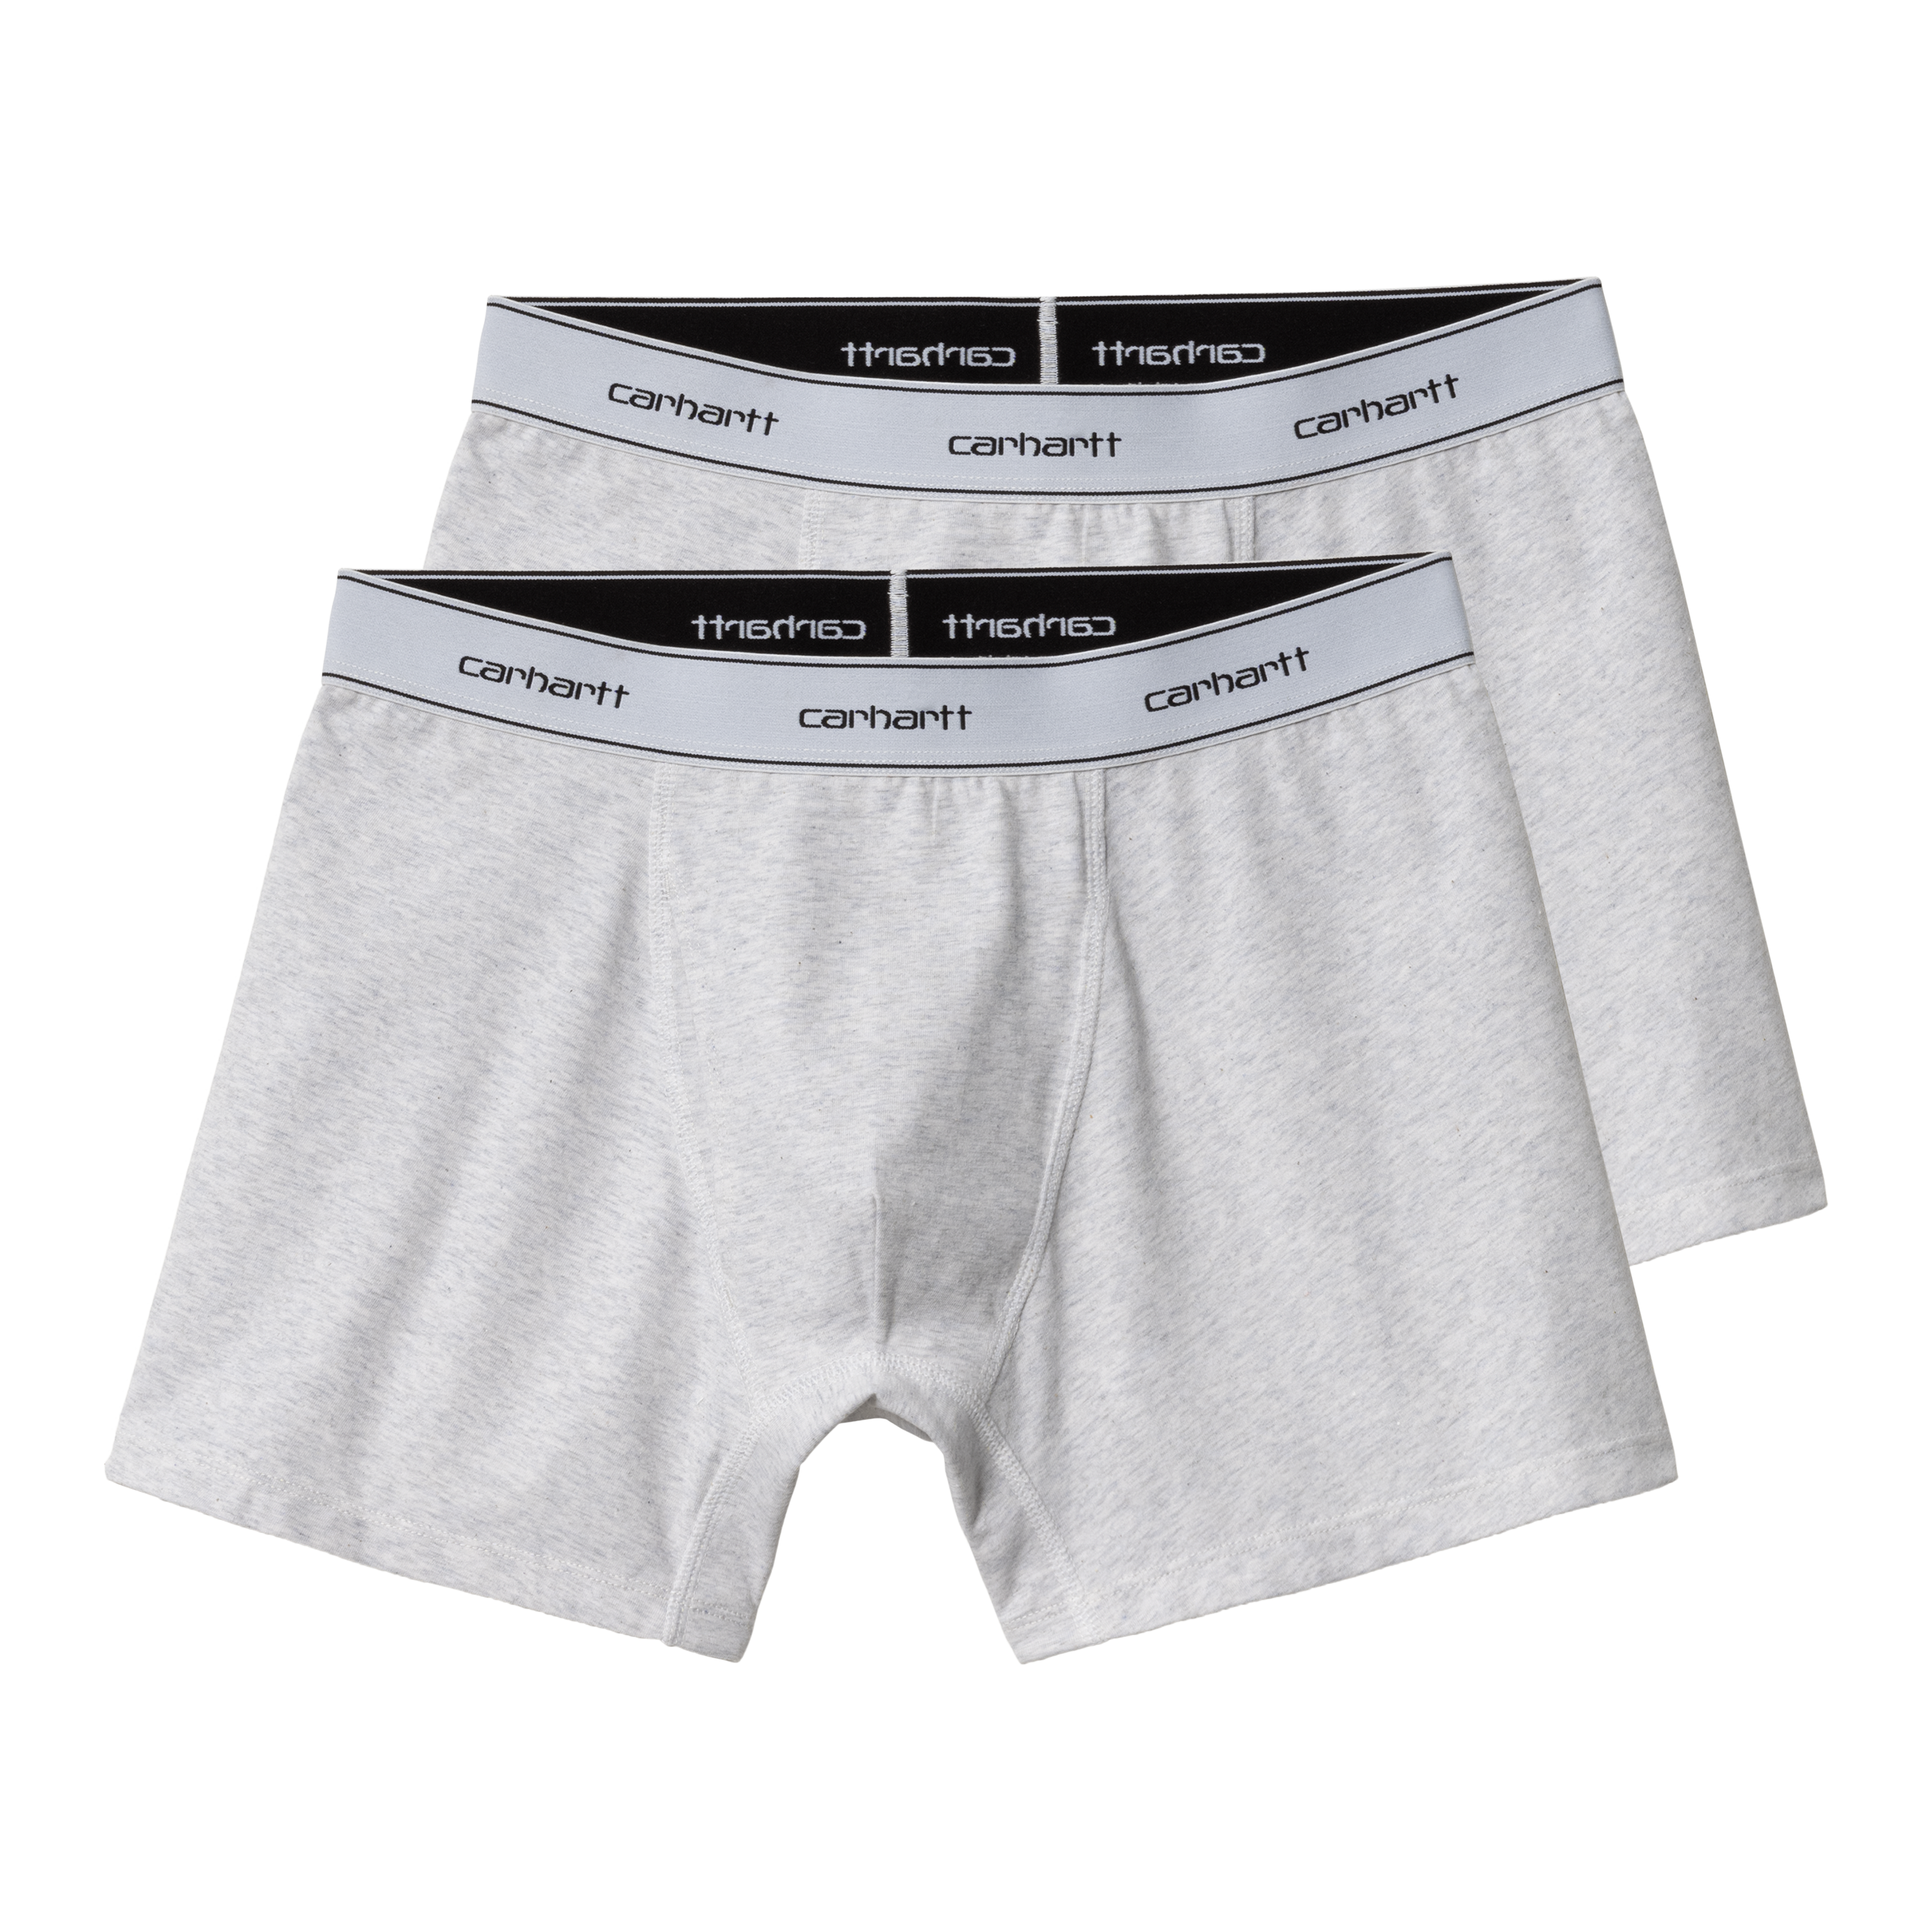 Carhartt WIP cotton 2 pack boxers in black